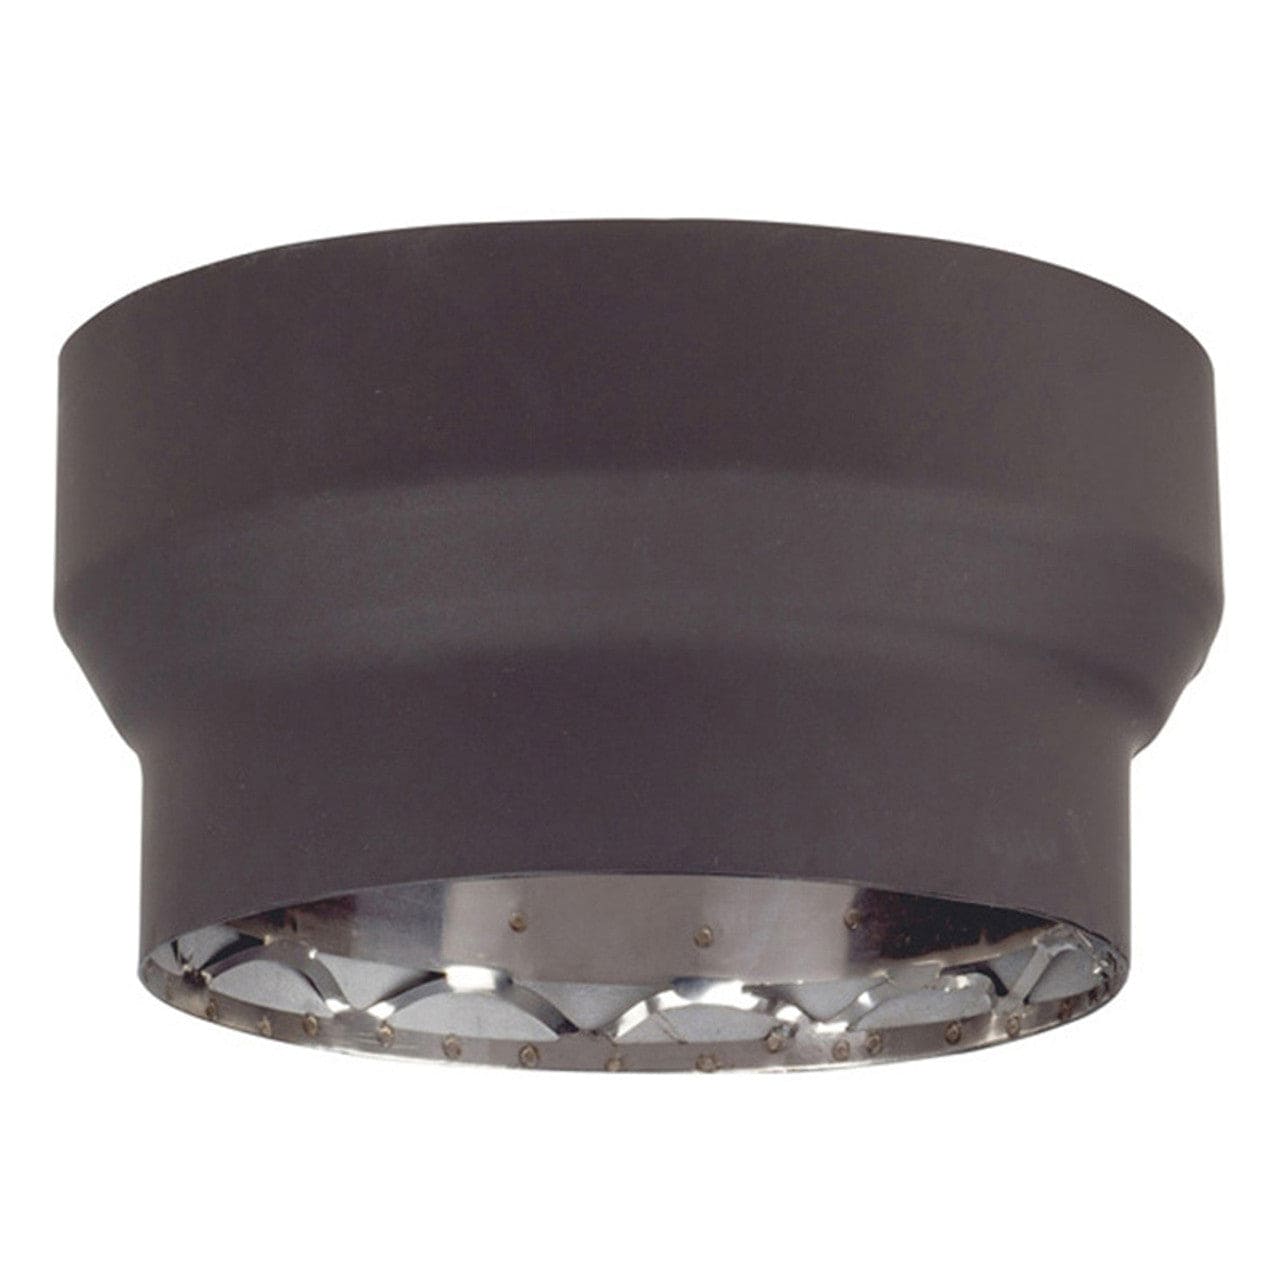 7" - 6" Ventis Double-Wall Black Stove Pipe 430 Inner/Satin Coat Steel Outer Reducer - VDB76 - Chimney Cricket